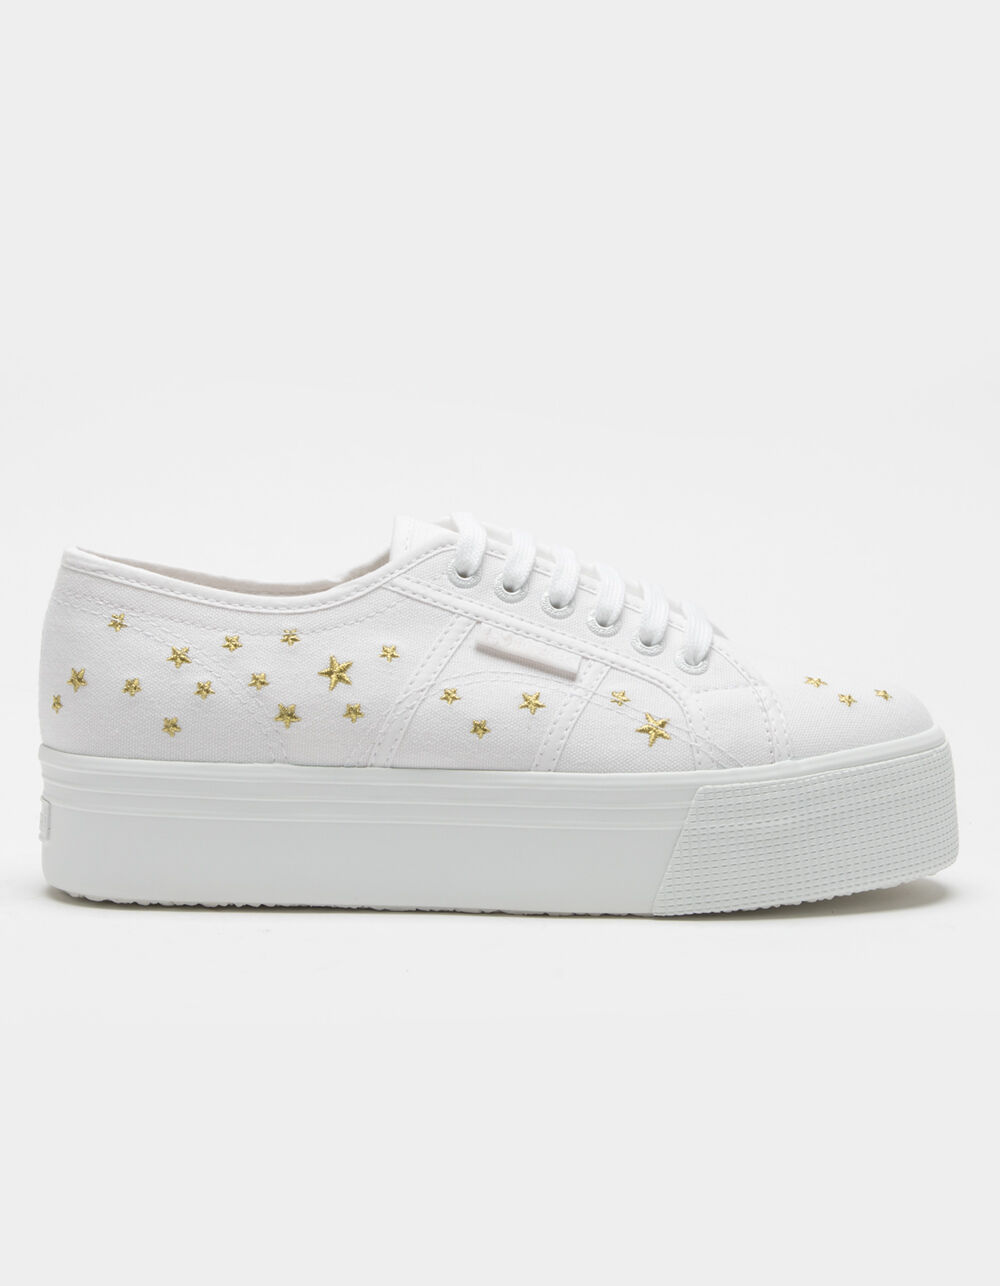 SUPERGA 2790 - Embroidery Womens Shoes - WHITE COMBO | Tillys